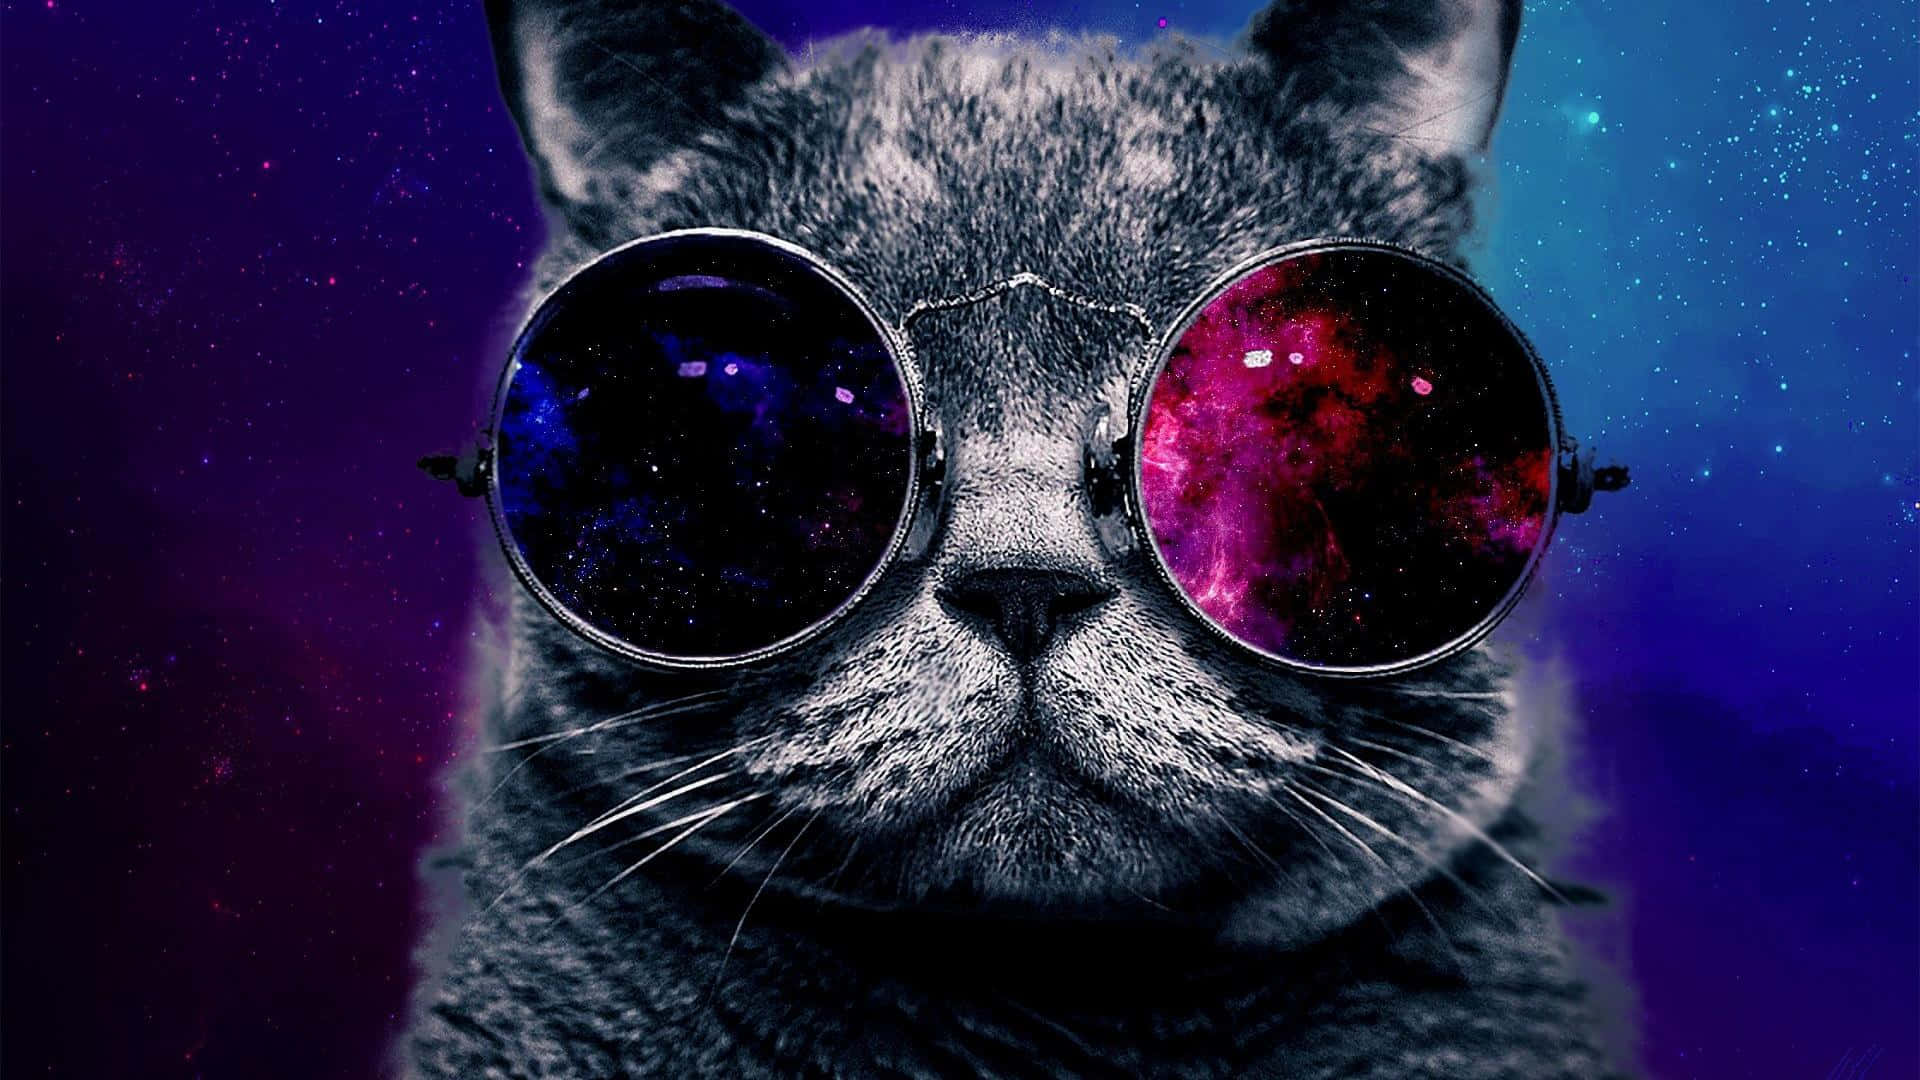 "The Fur-tivity of Traveling Through Space" Wallpaper